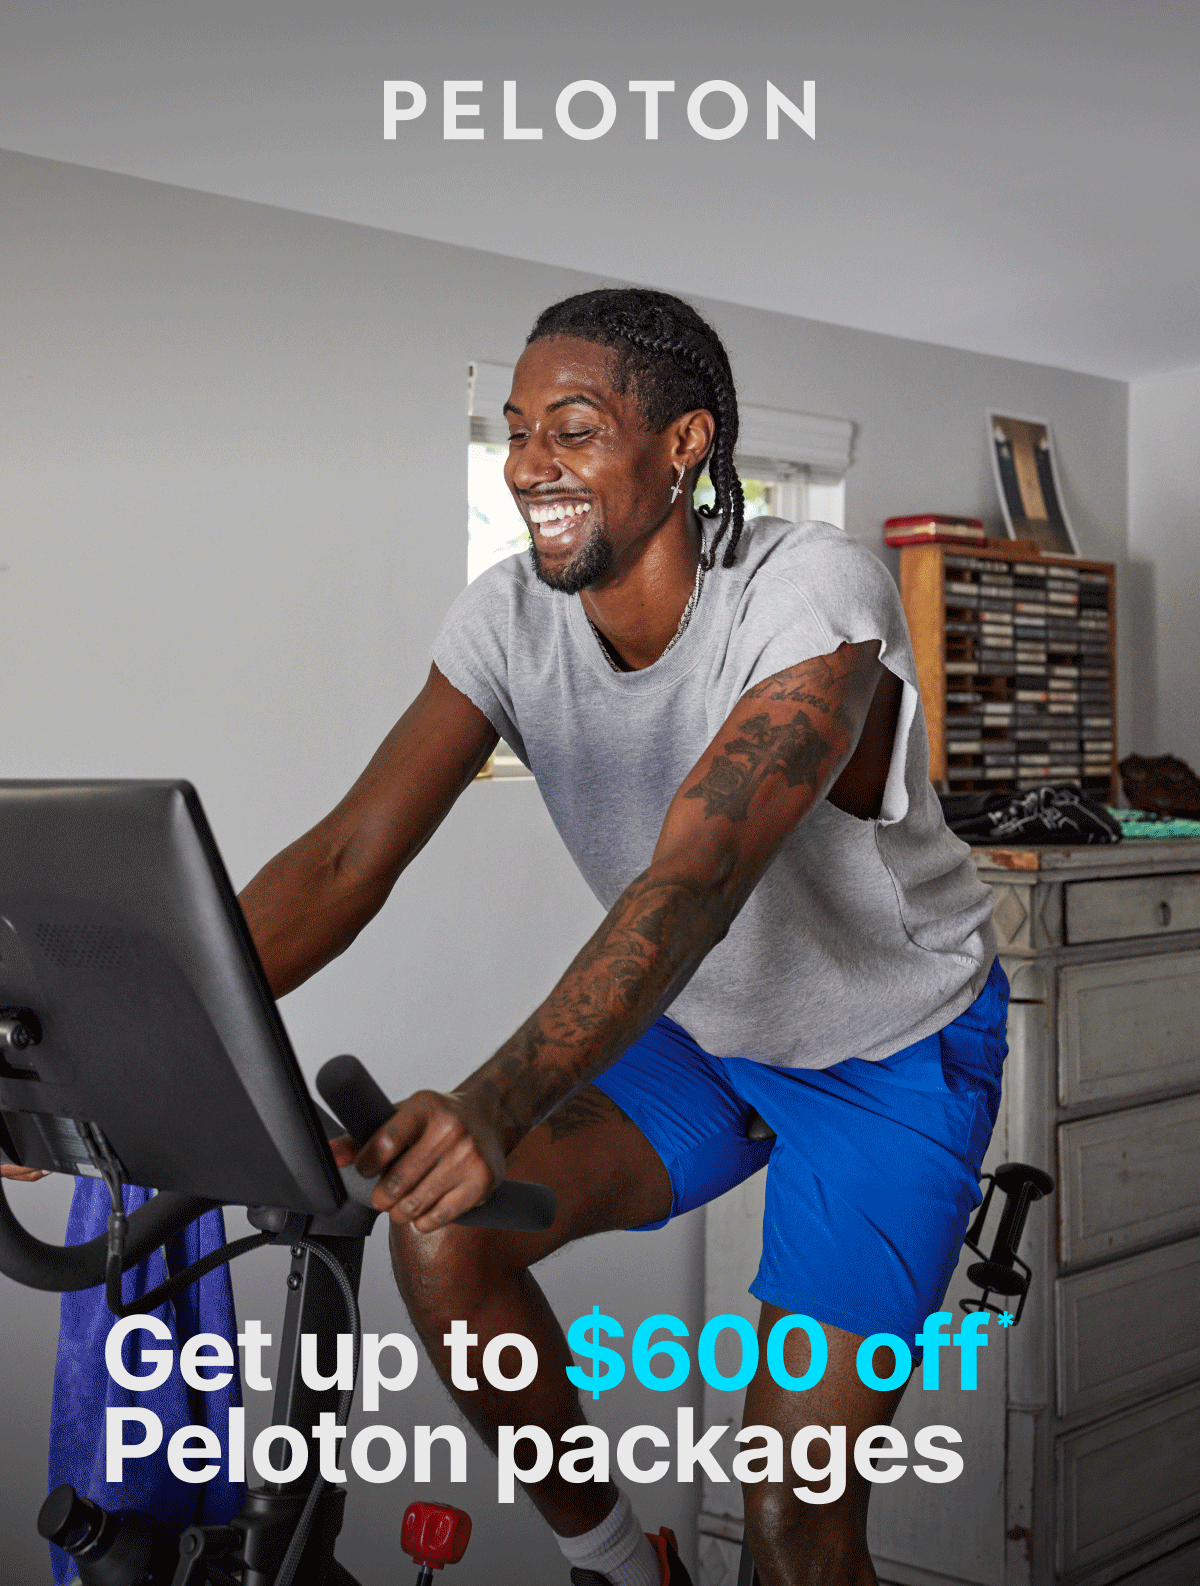 Get up to \\$600 off Peloton packages